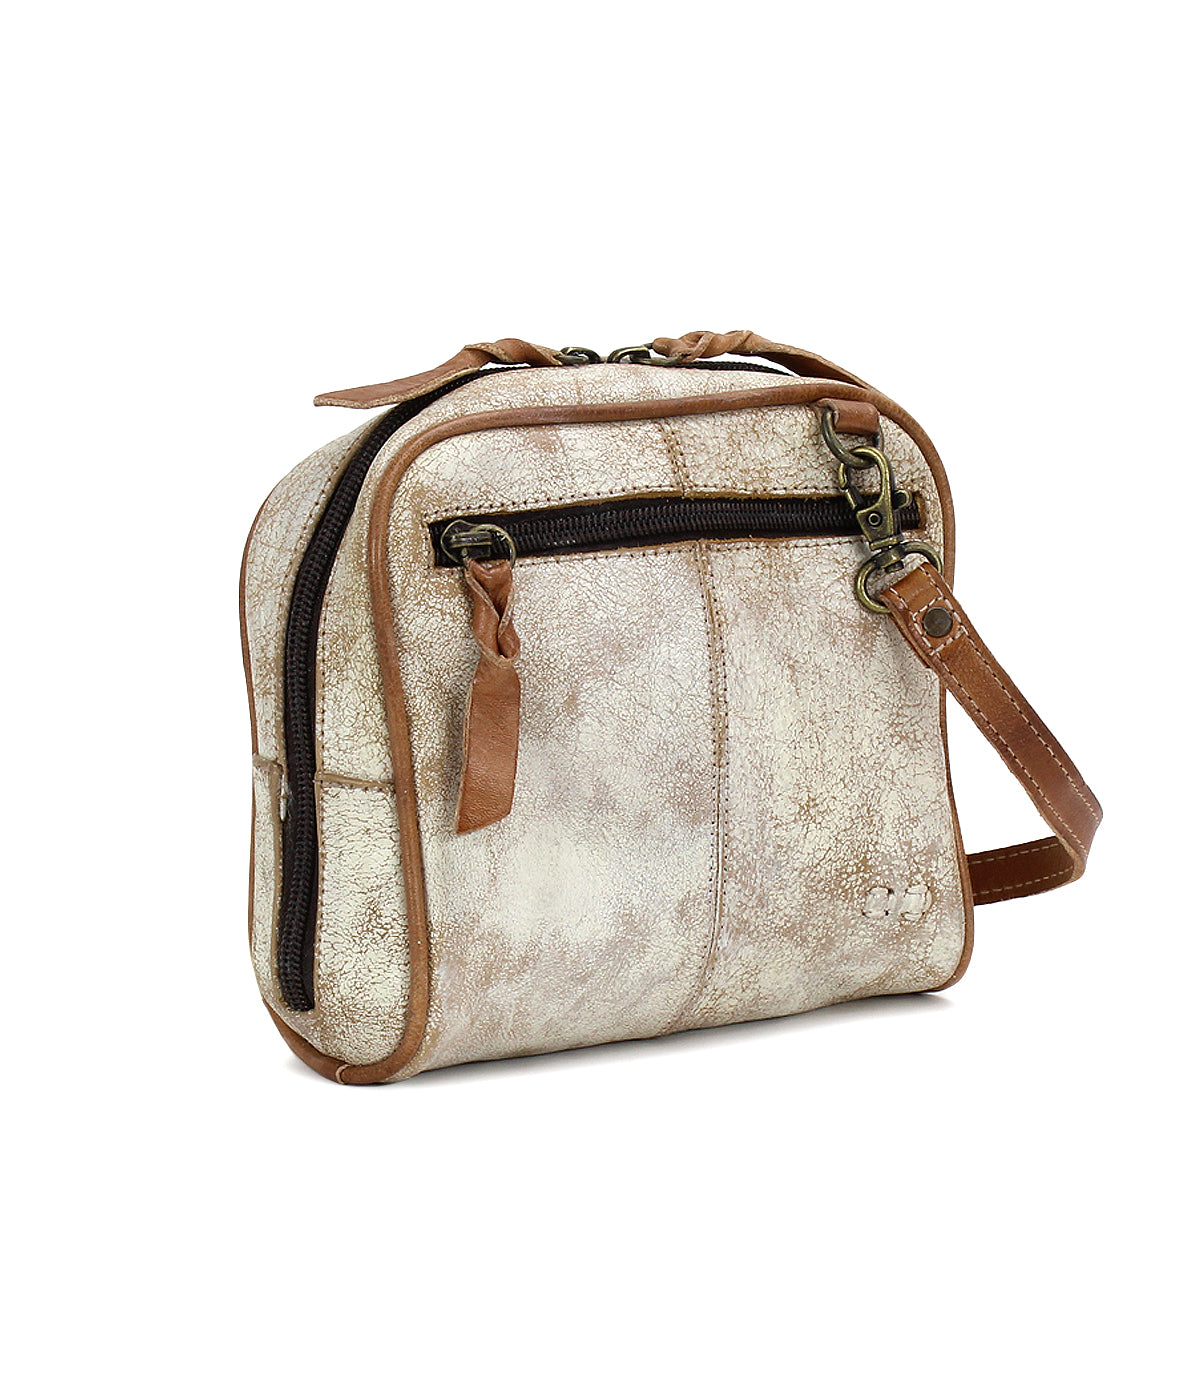 Bed Stu captures the essence of elegance with this petite masterpiece. This white and brown Bed Stu cross body bag, crafted from eco-friendly leather, is not only stylish but also environmentally conscious.